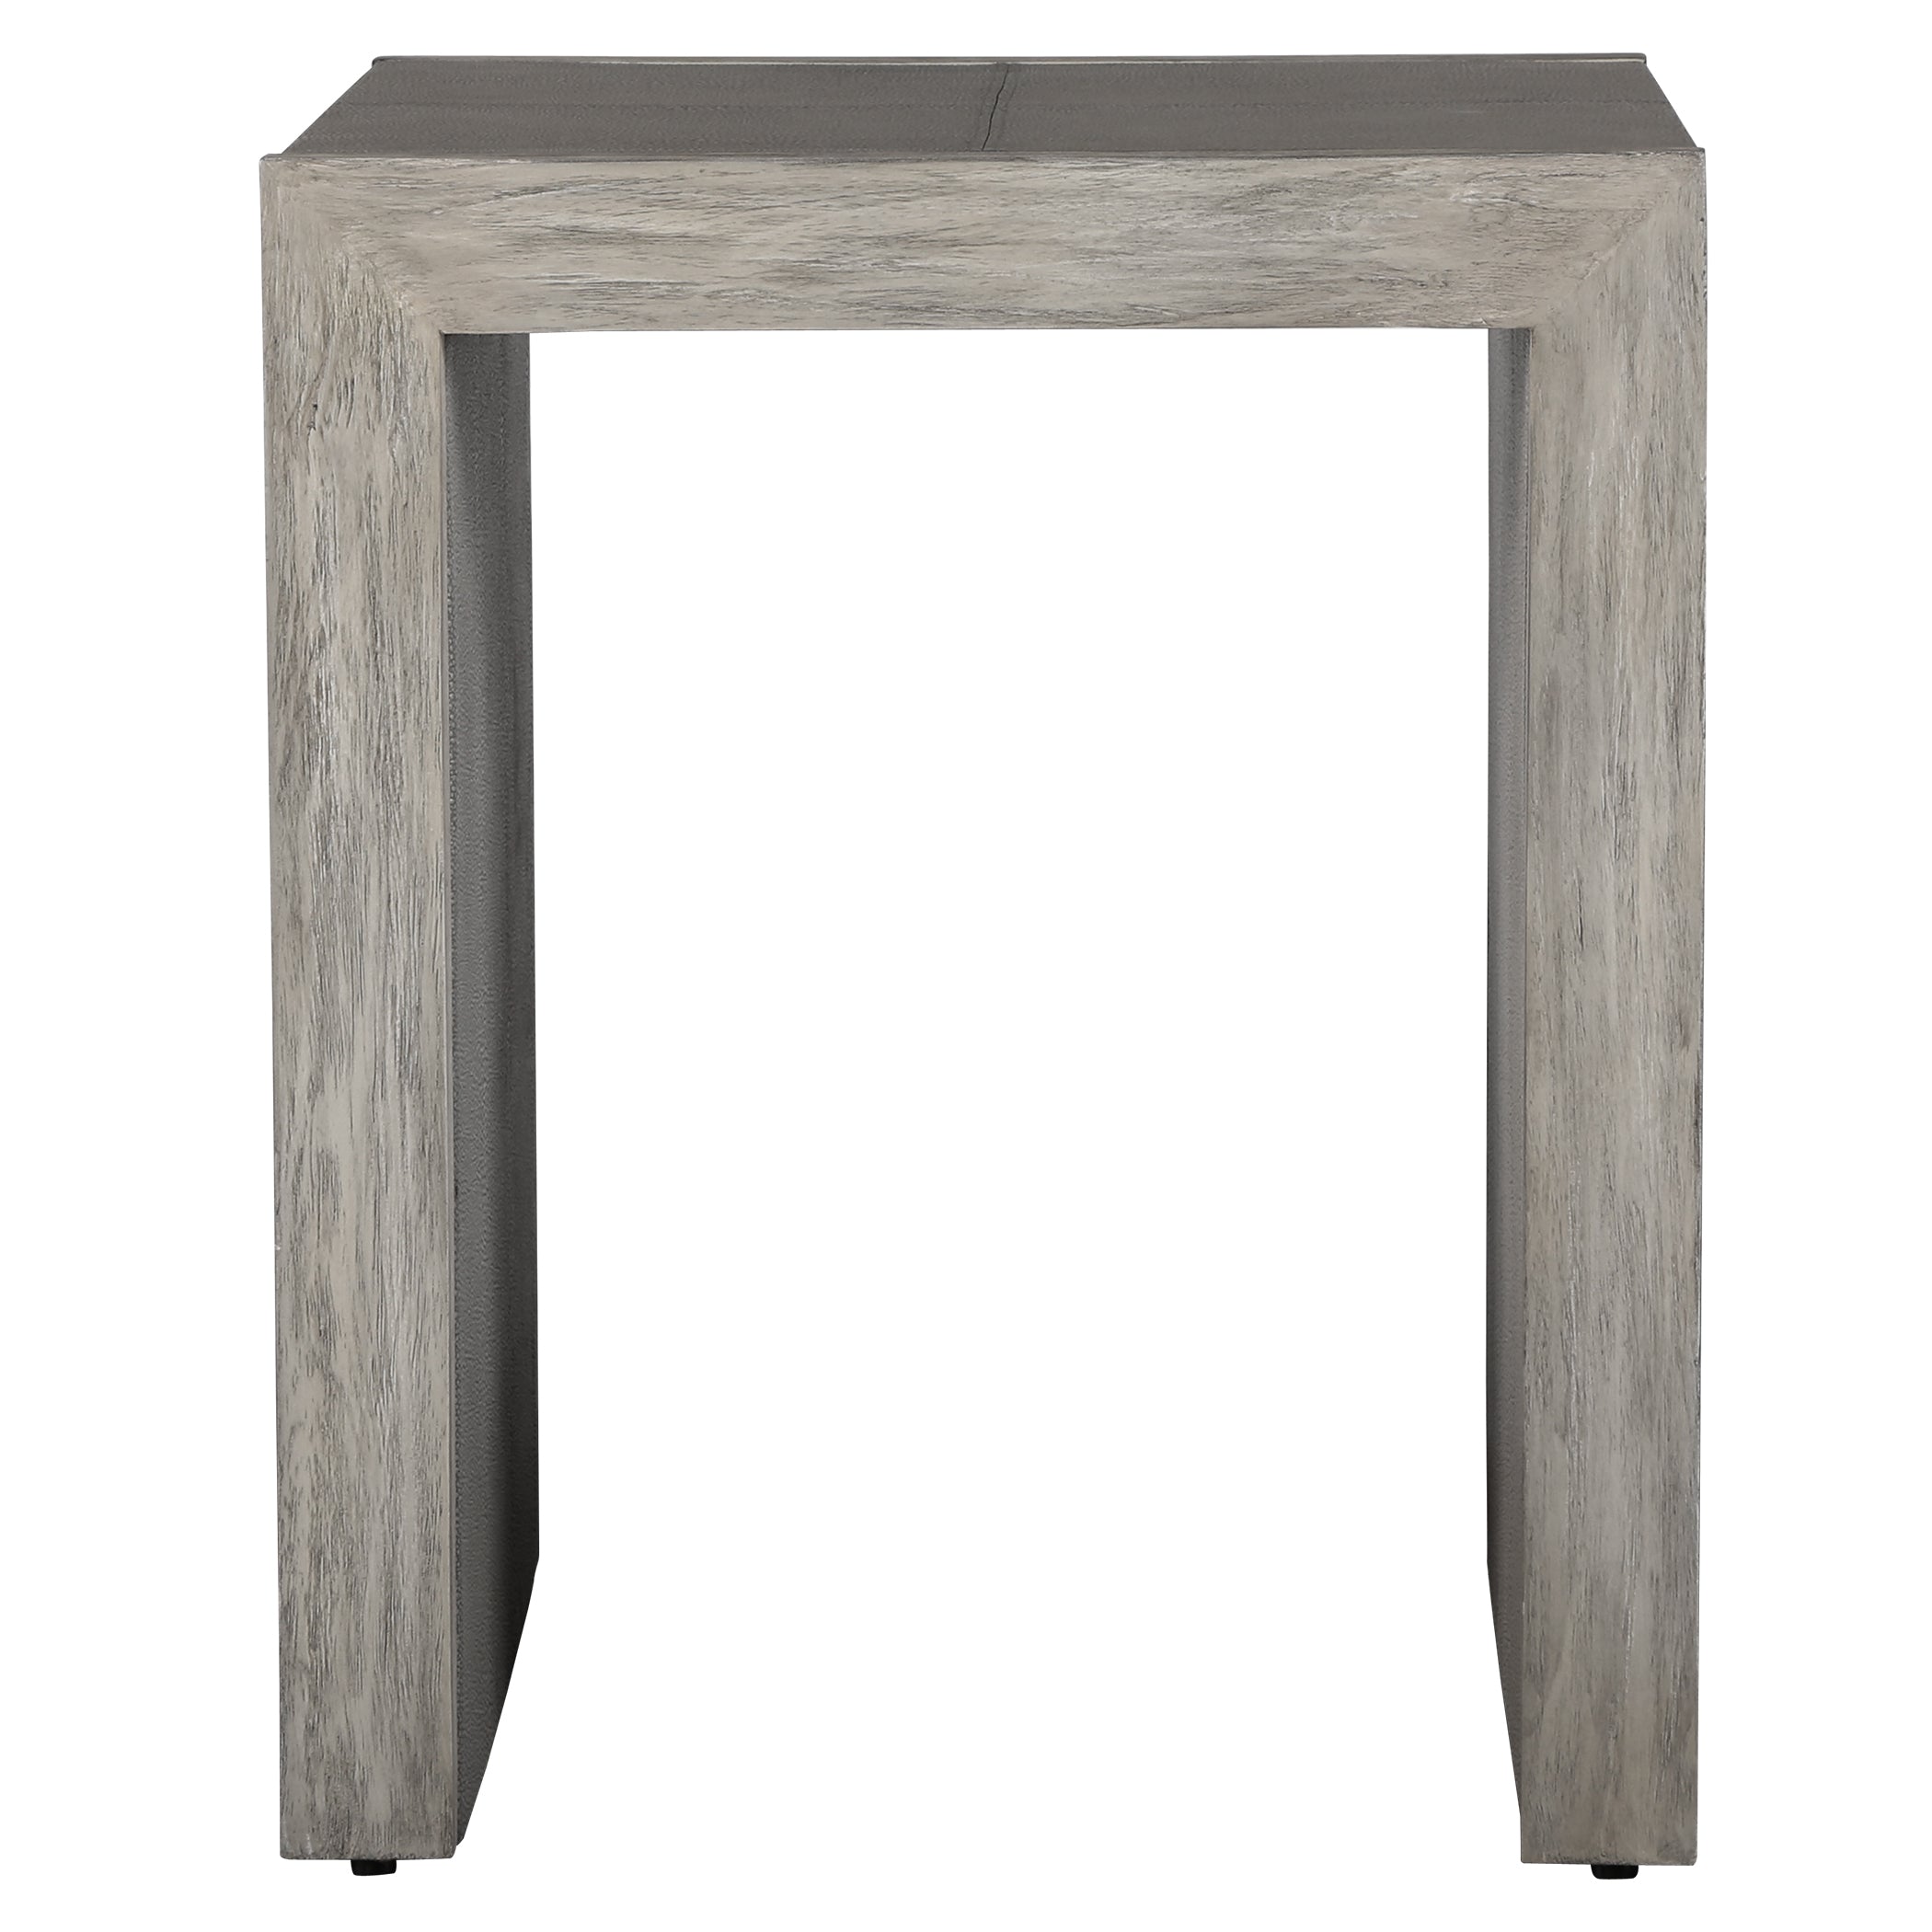 Uttermost Aerina Accent & End Tables Accent & End Tables Uttermost   